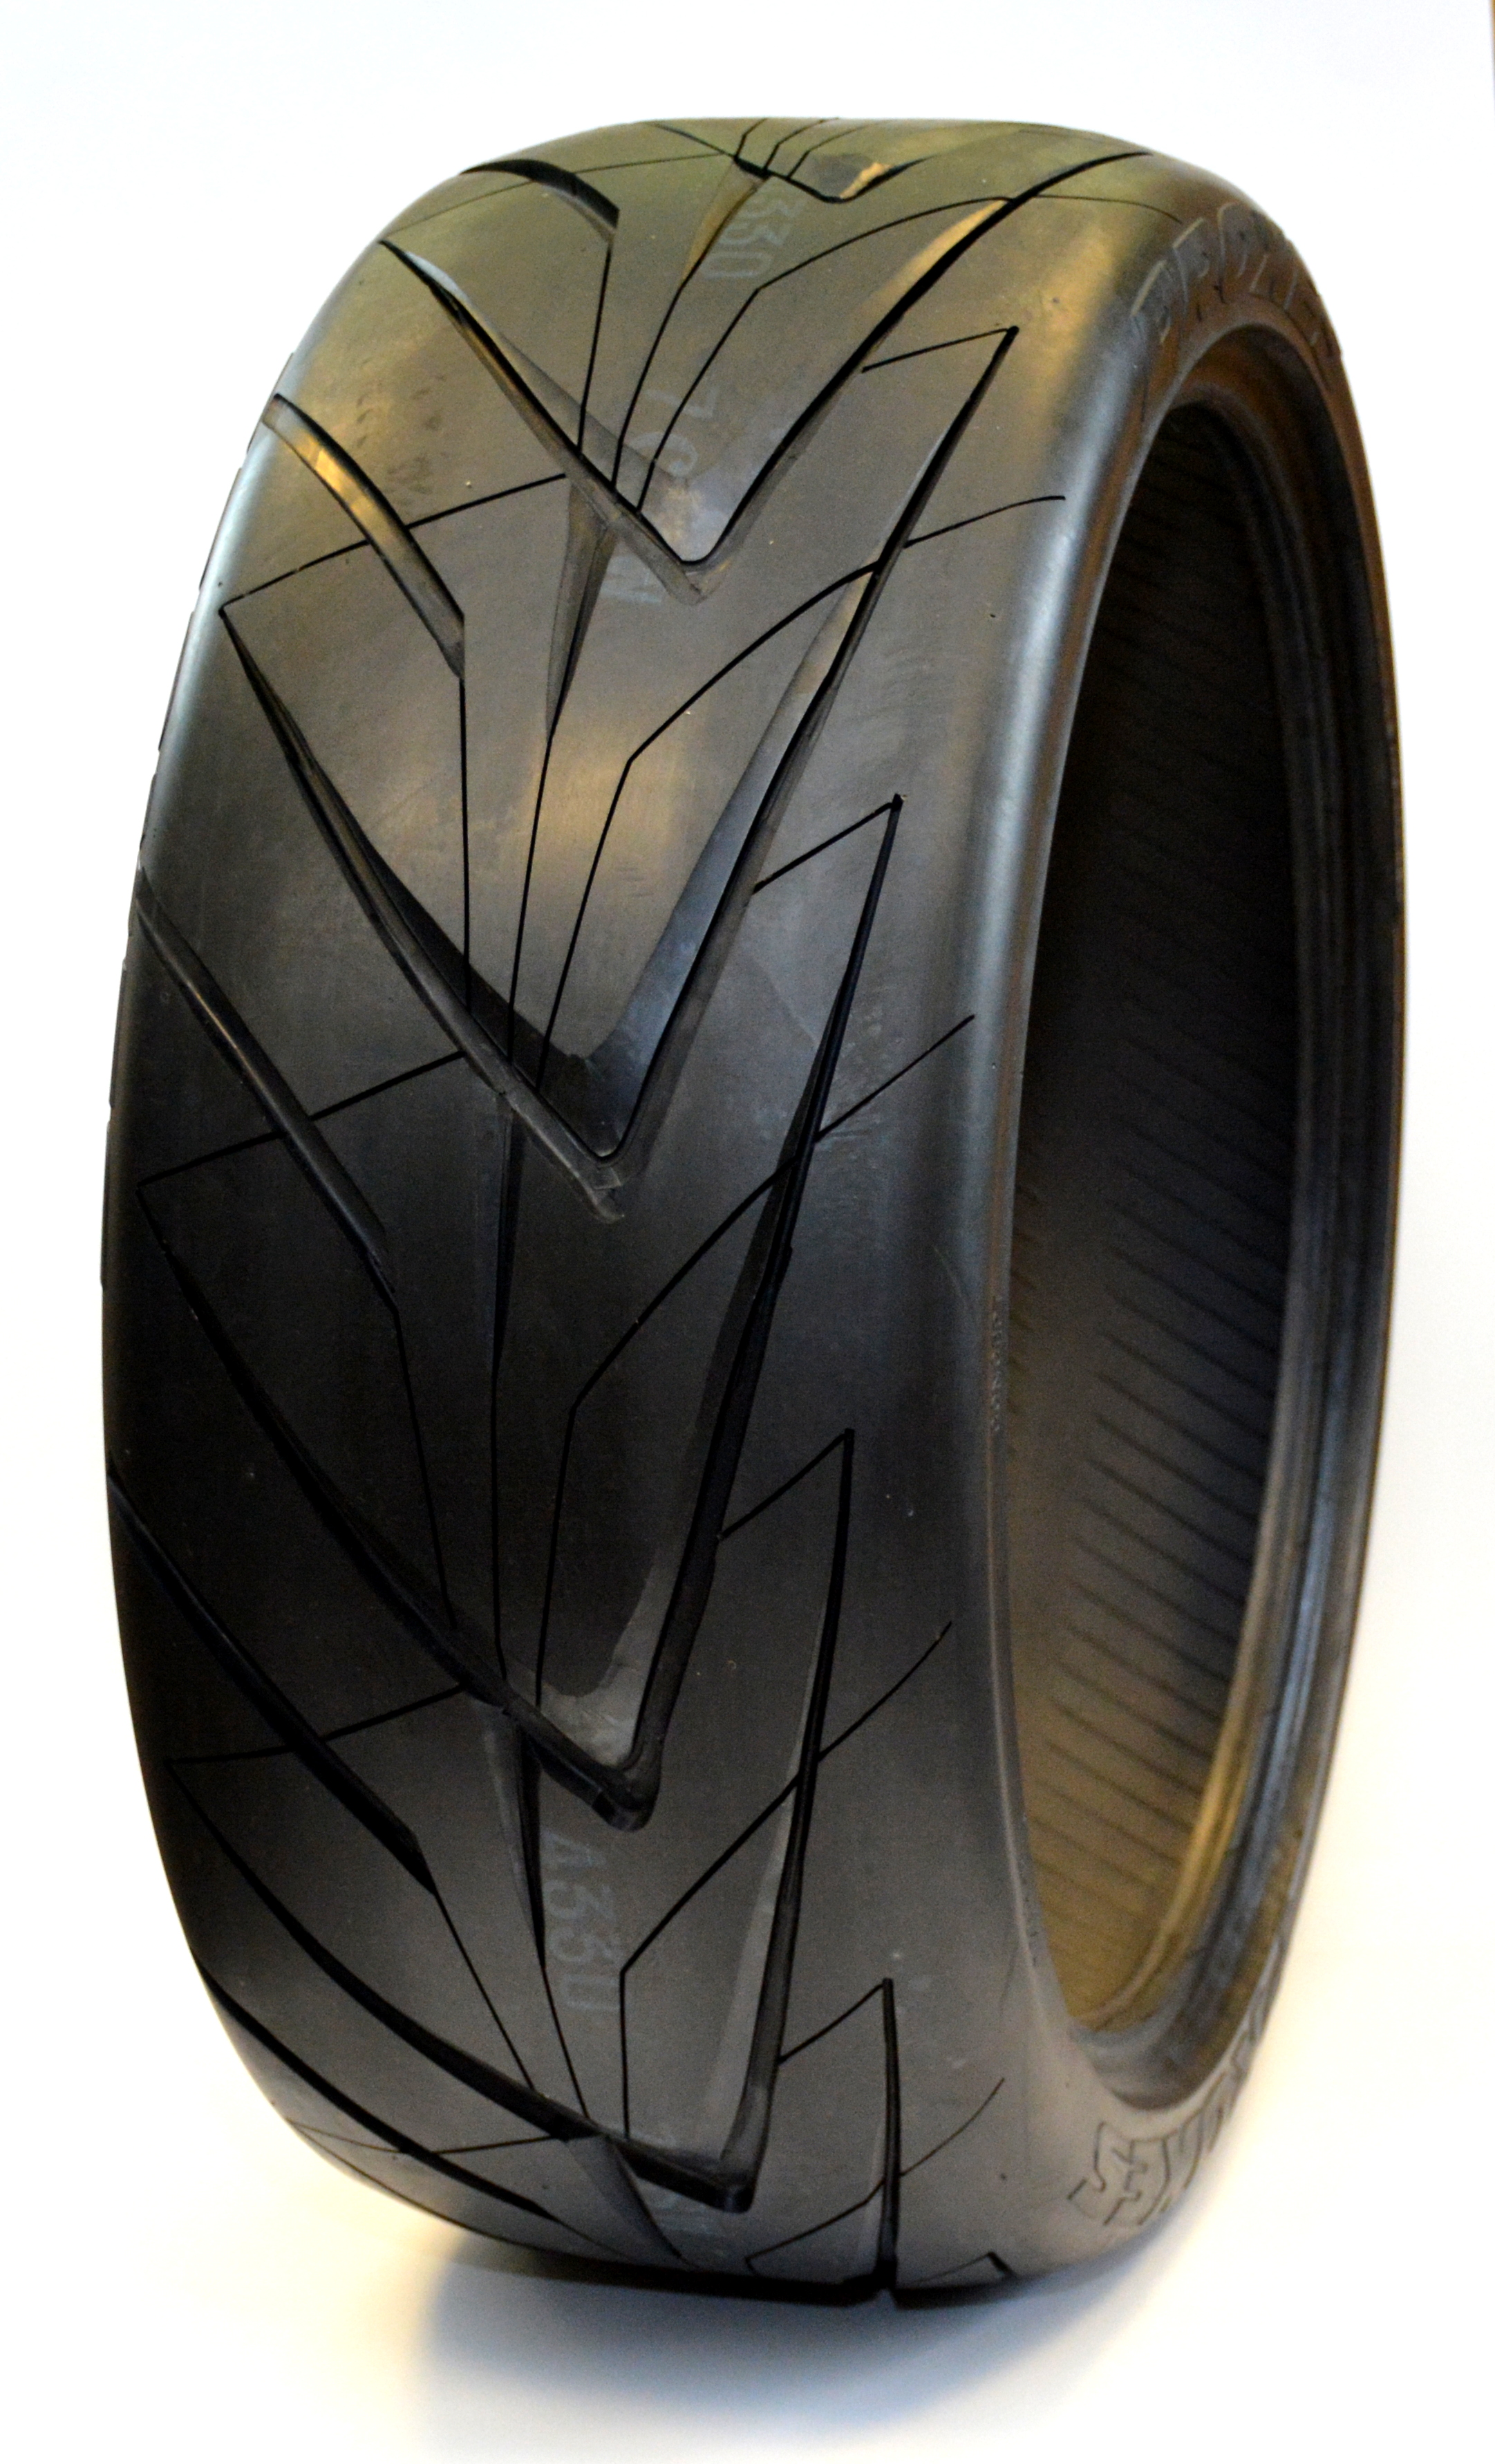 Toyo concept tyre hints at future direction